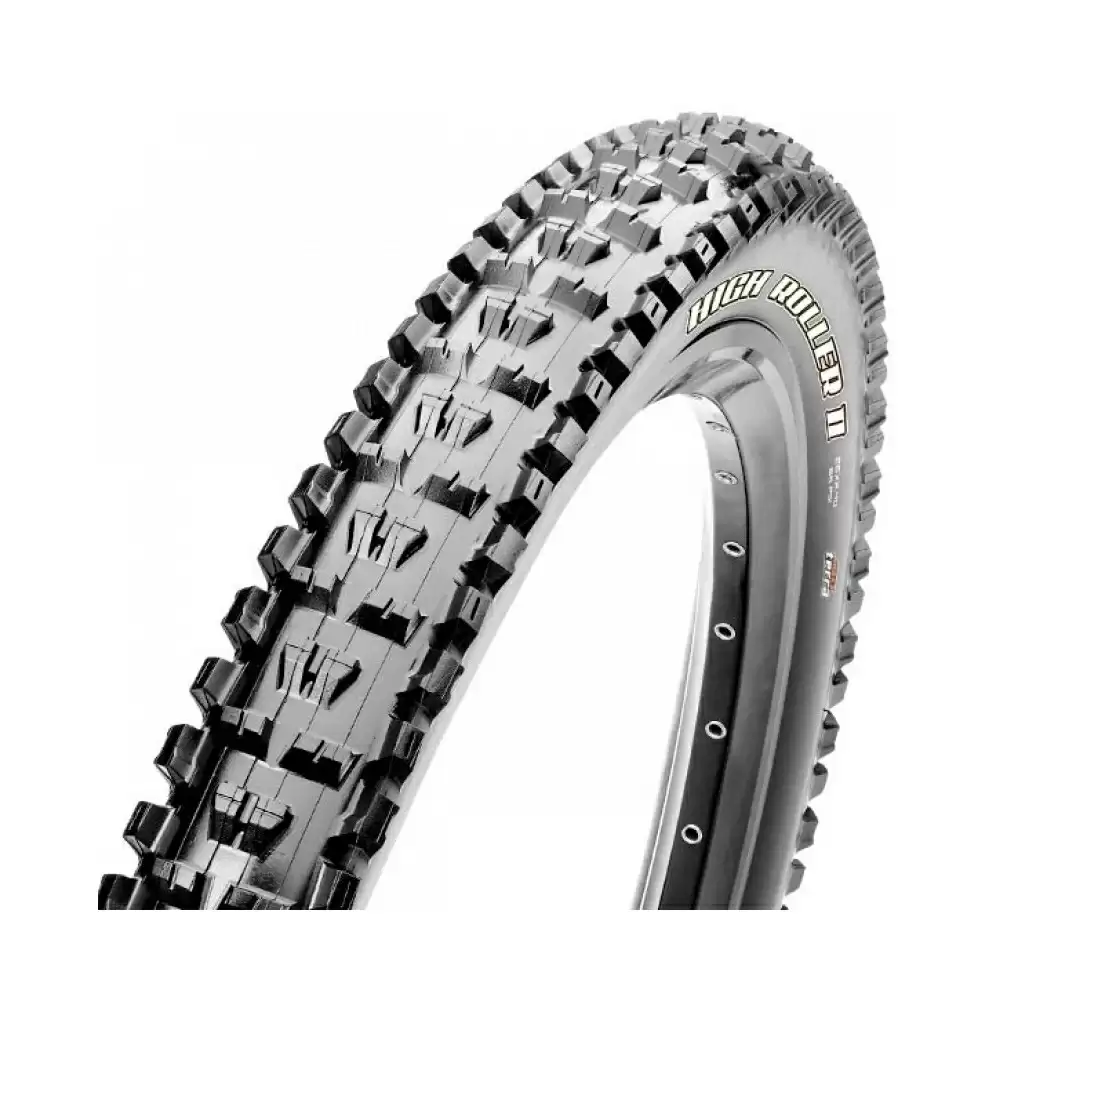 Cubierta High Roller II Exo Tr 27.5x2.80'' Dual 60TPI Tubeless Ready Negro - image